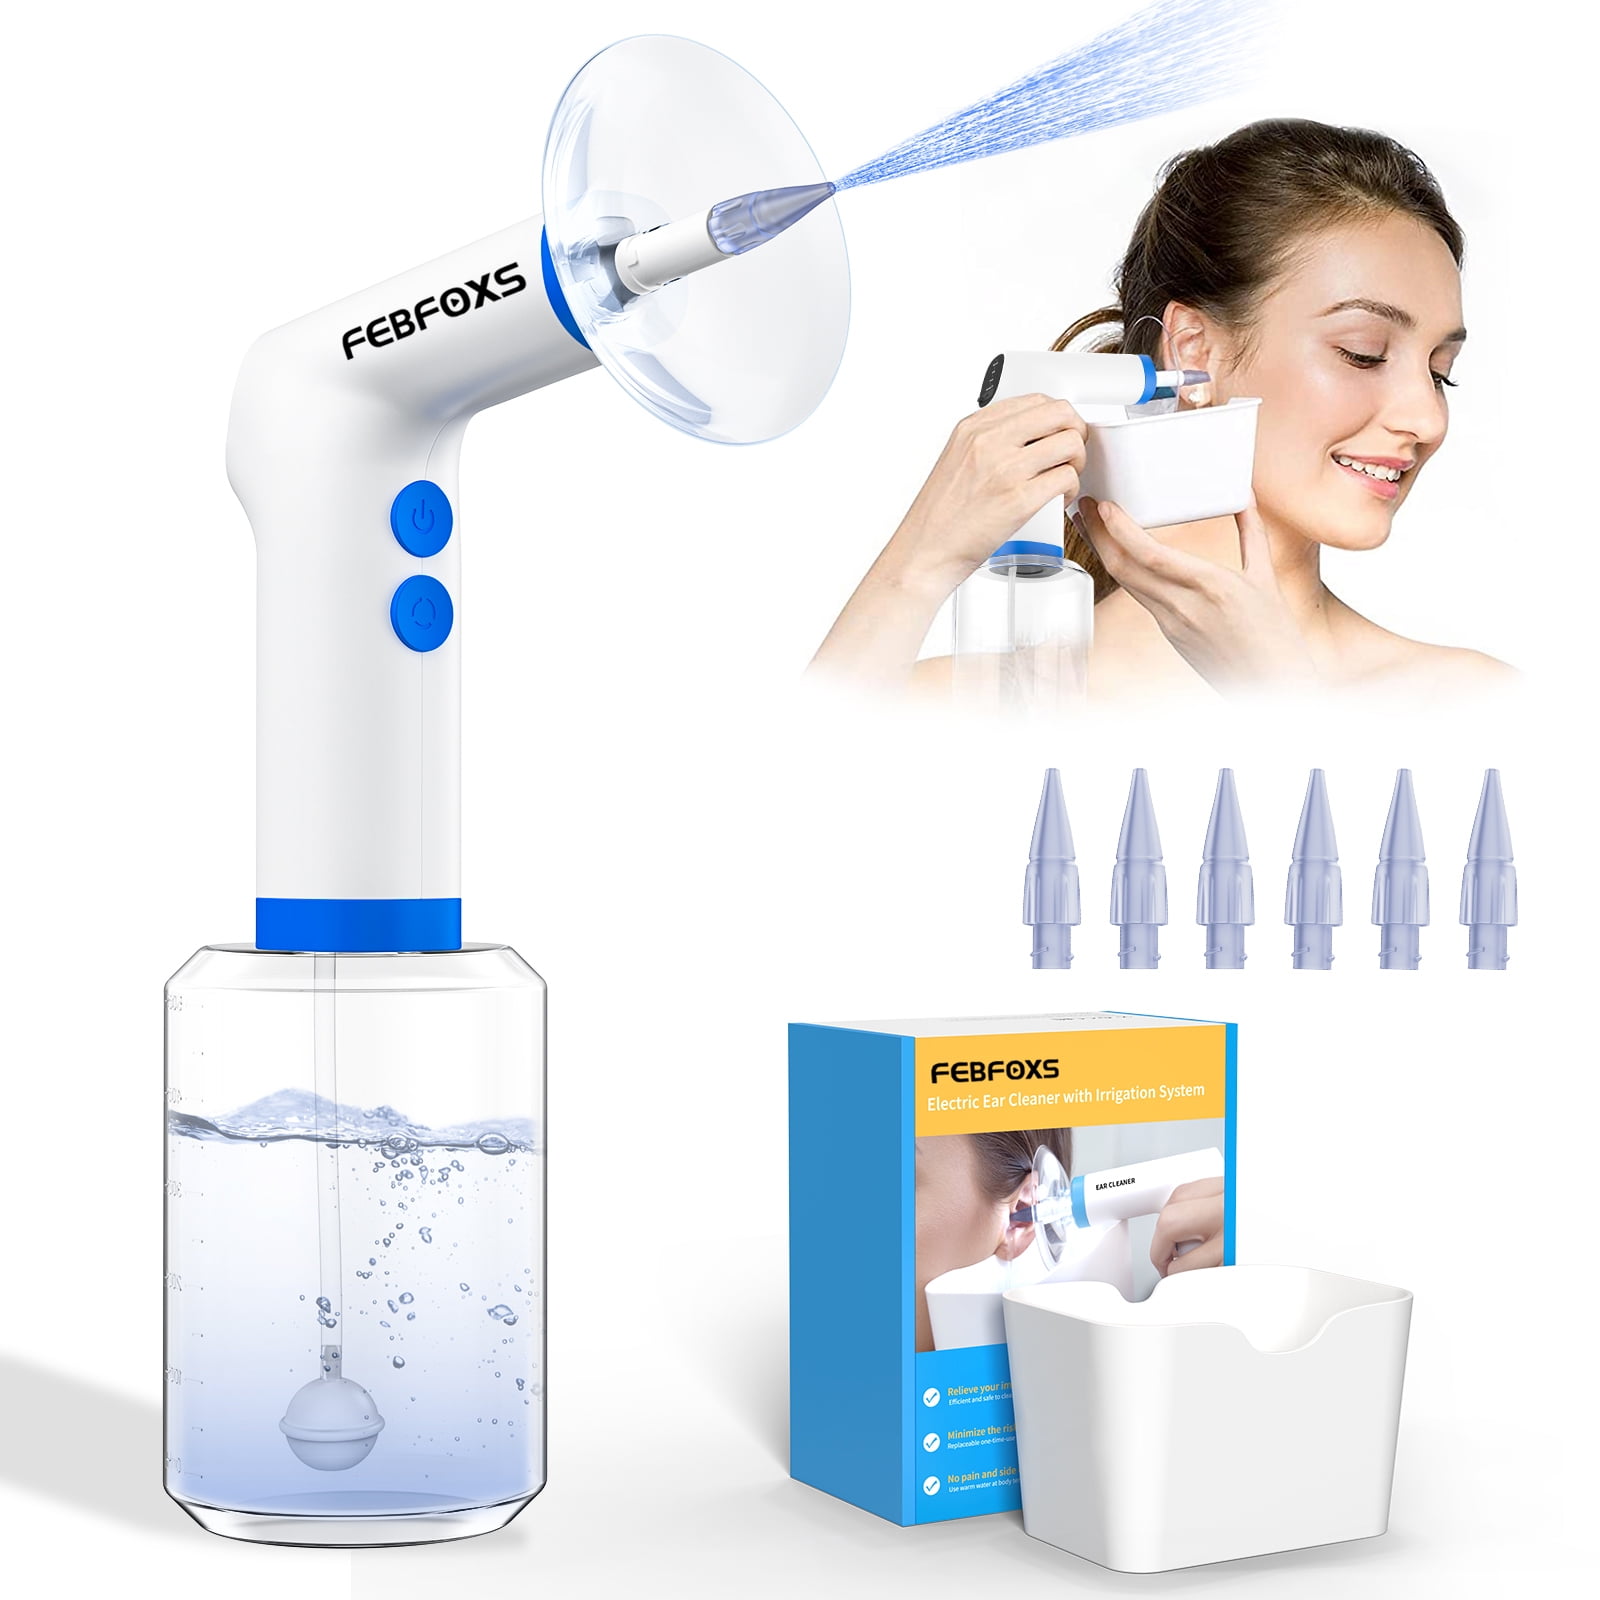 Febfoxs Ear Wax Removal, Ear Cleaning Kit,4 Cleaning Modes, One